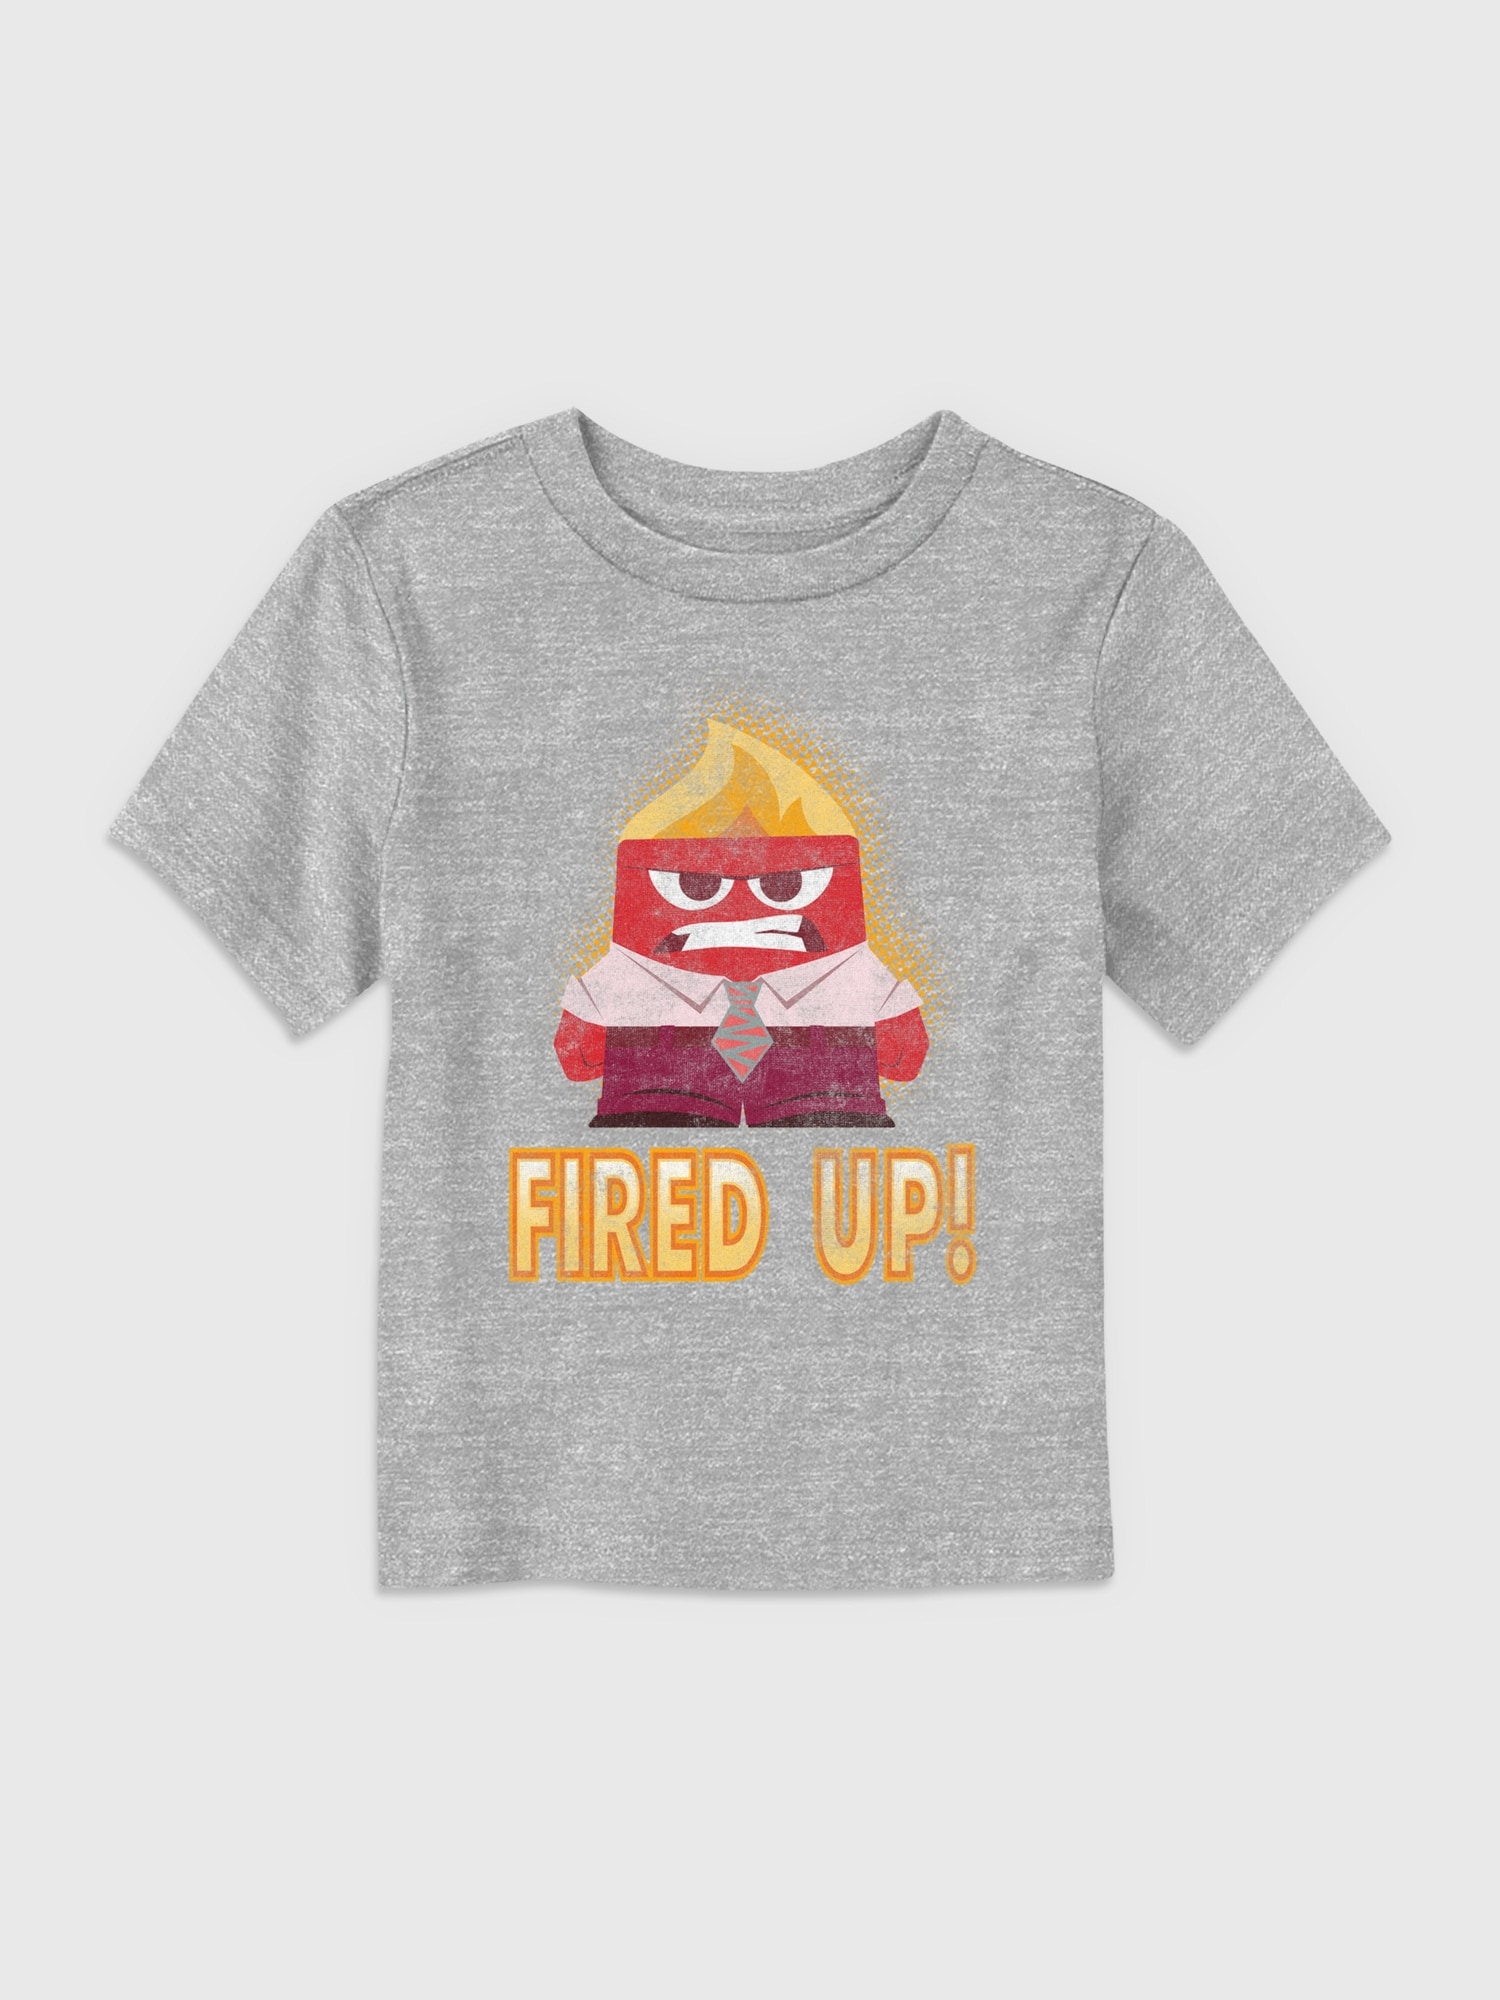 Gap Toddler Inside Out Fired Up Graphic Tee